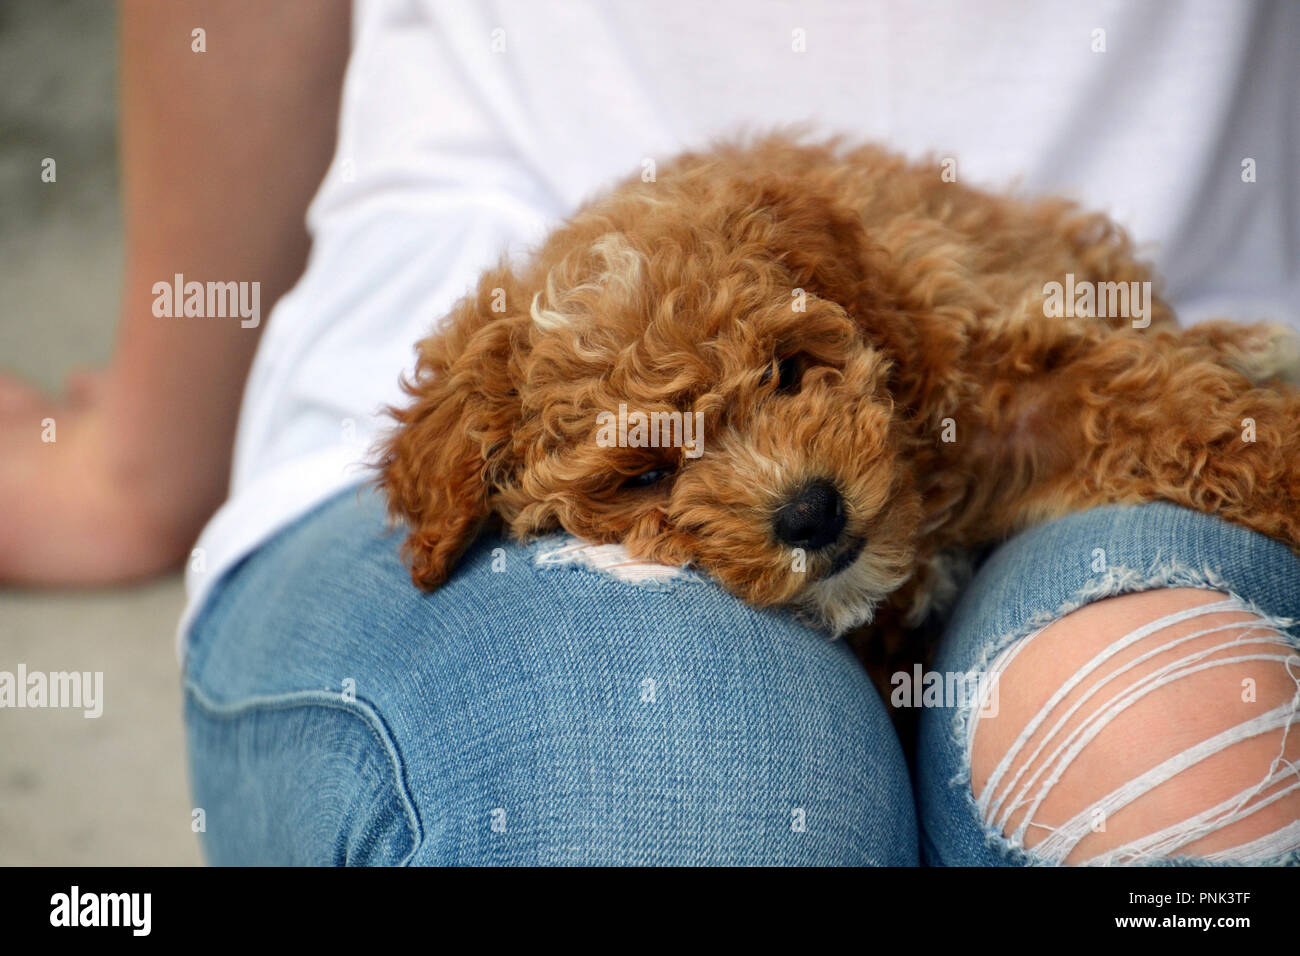 Cute maltipoo puppy lying on girls' lap wearing ripped jeans Stock Photo